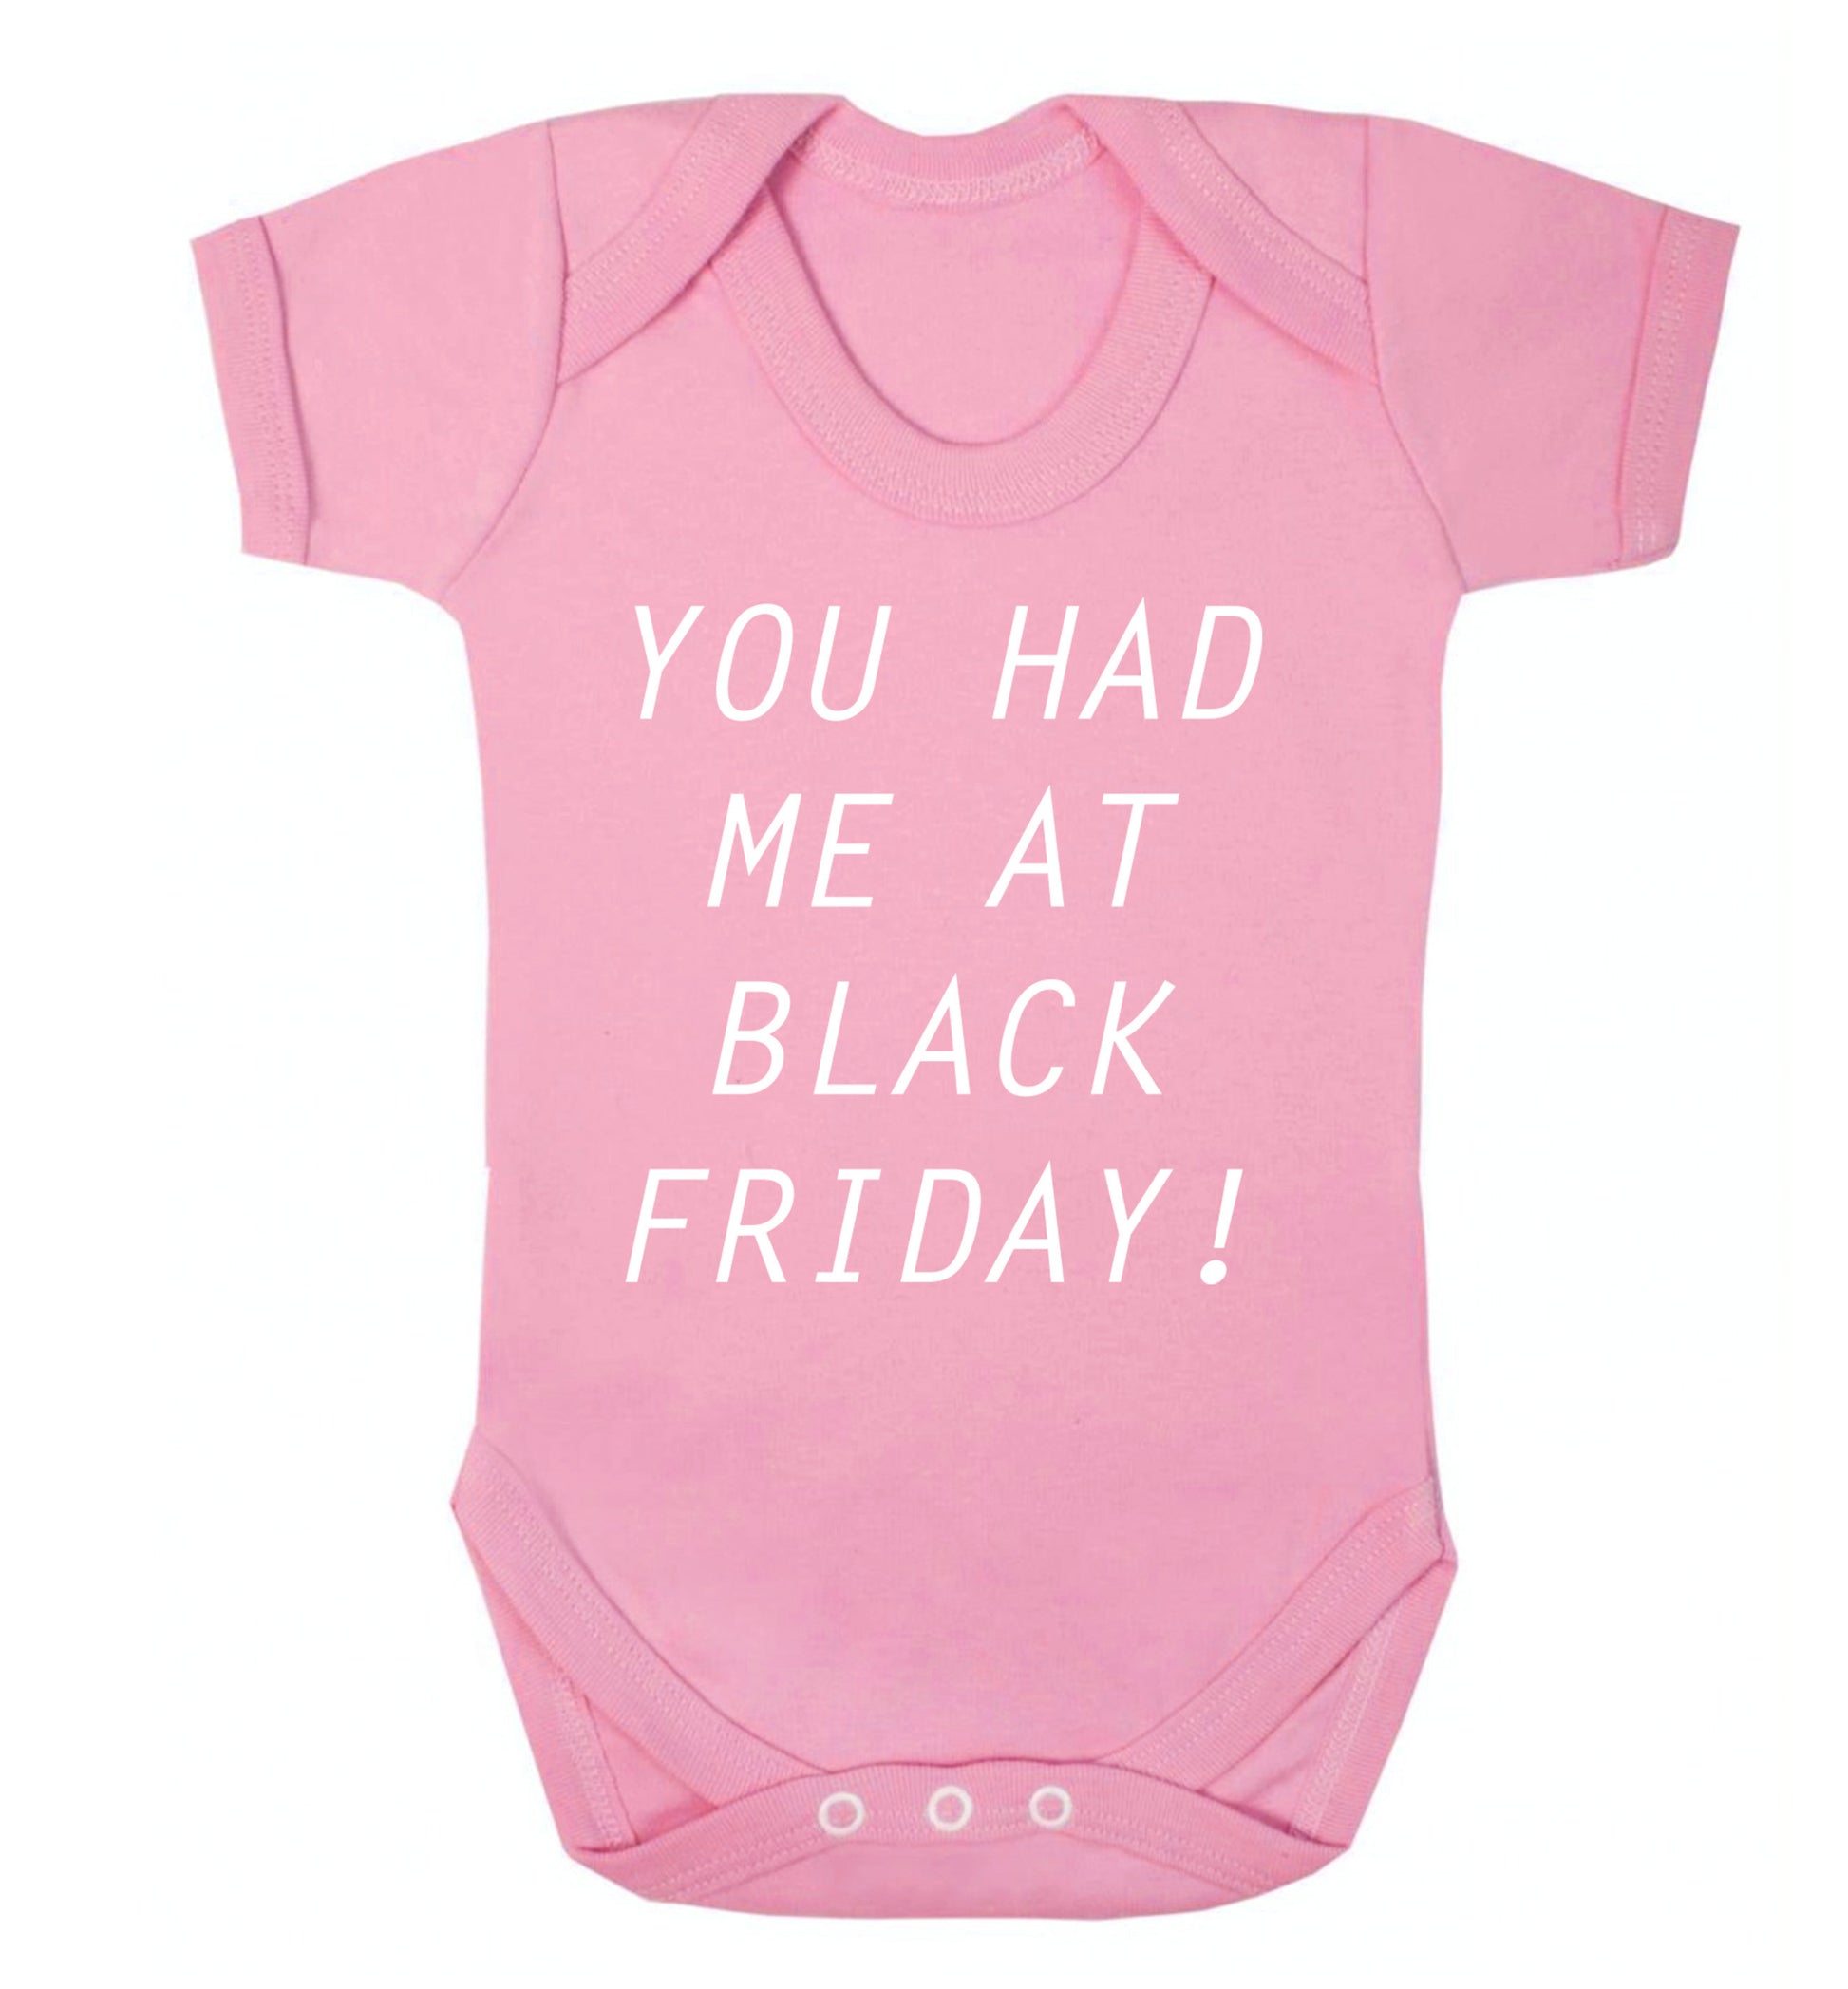 You had me at black friday Baby Vest pale pink 18-24 months